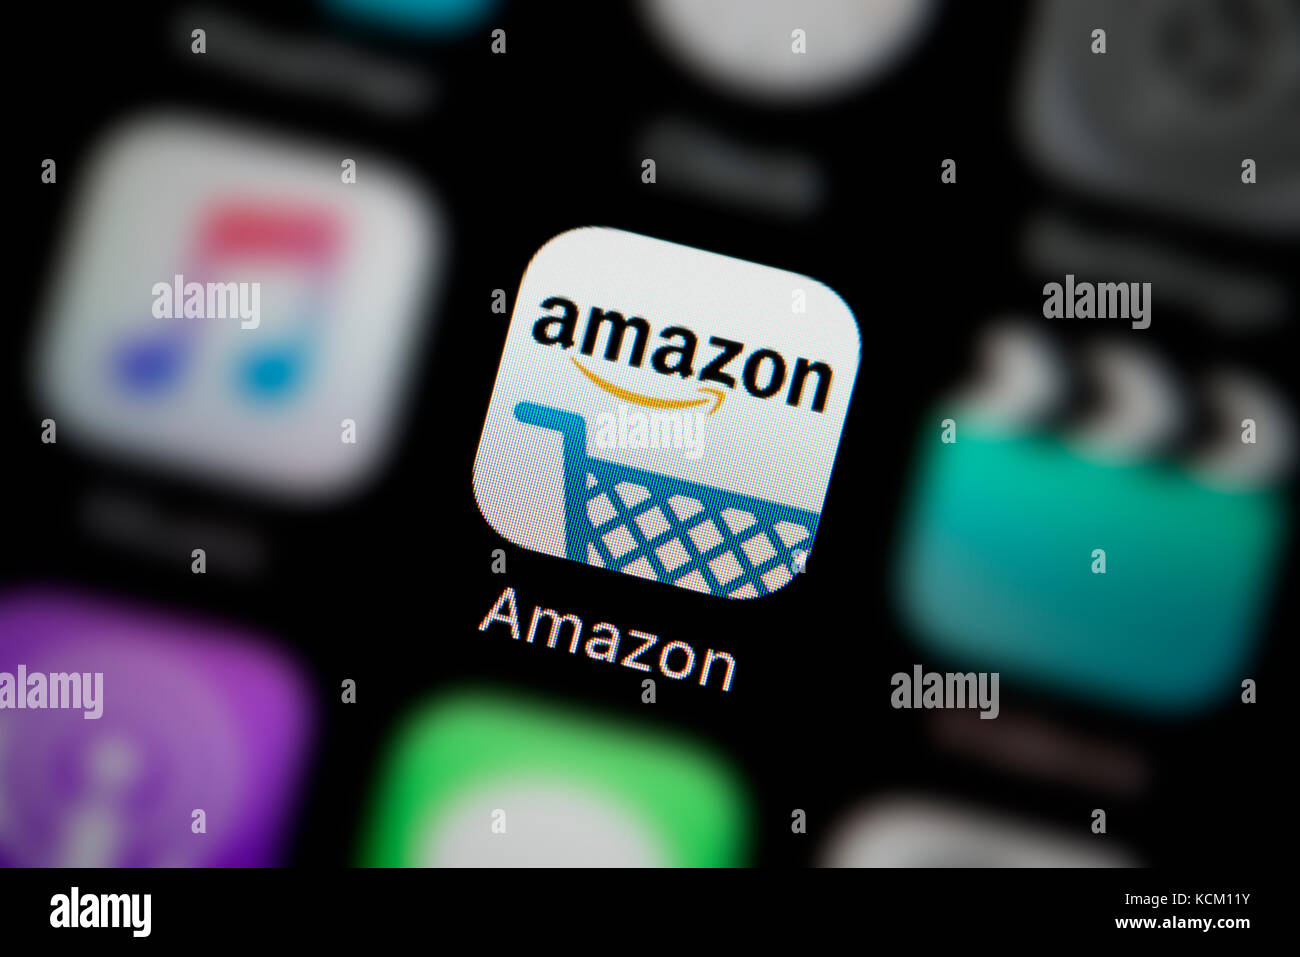 Screen Shot Amazon High Resolution Stock Photography and Images - Alamy